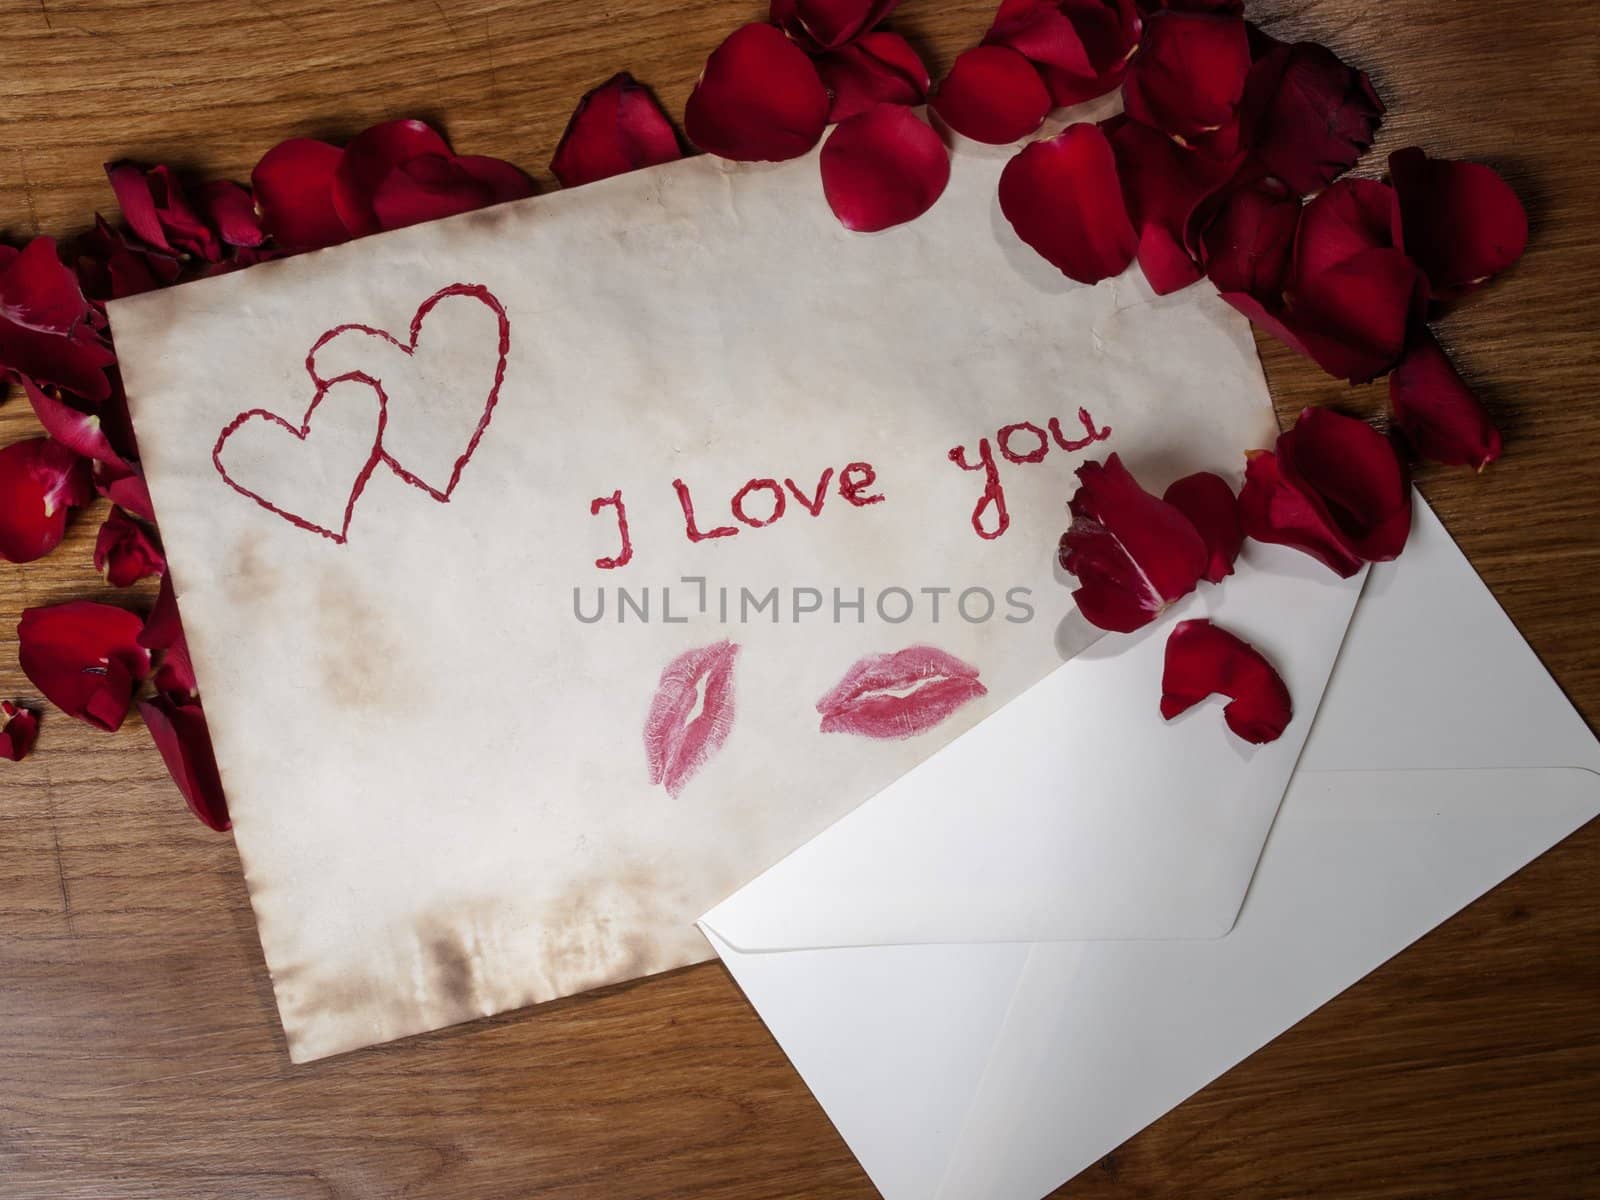 composition of old valentines cards and envelopes with scattered rose petals on the wooden table